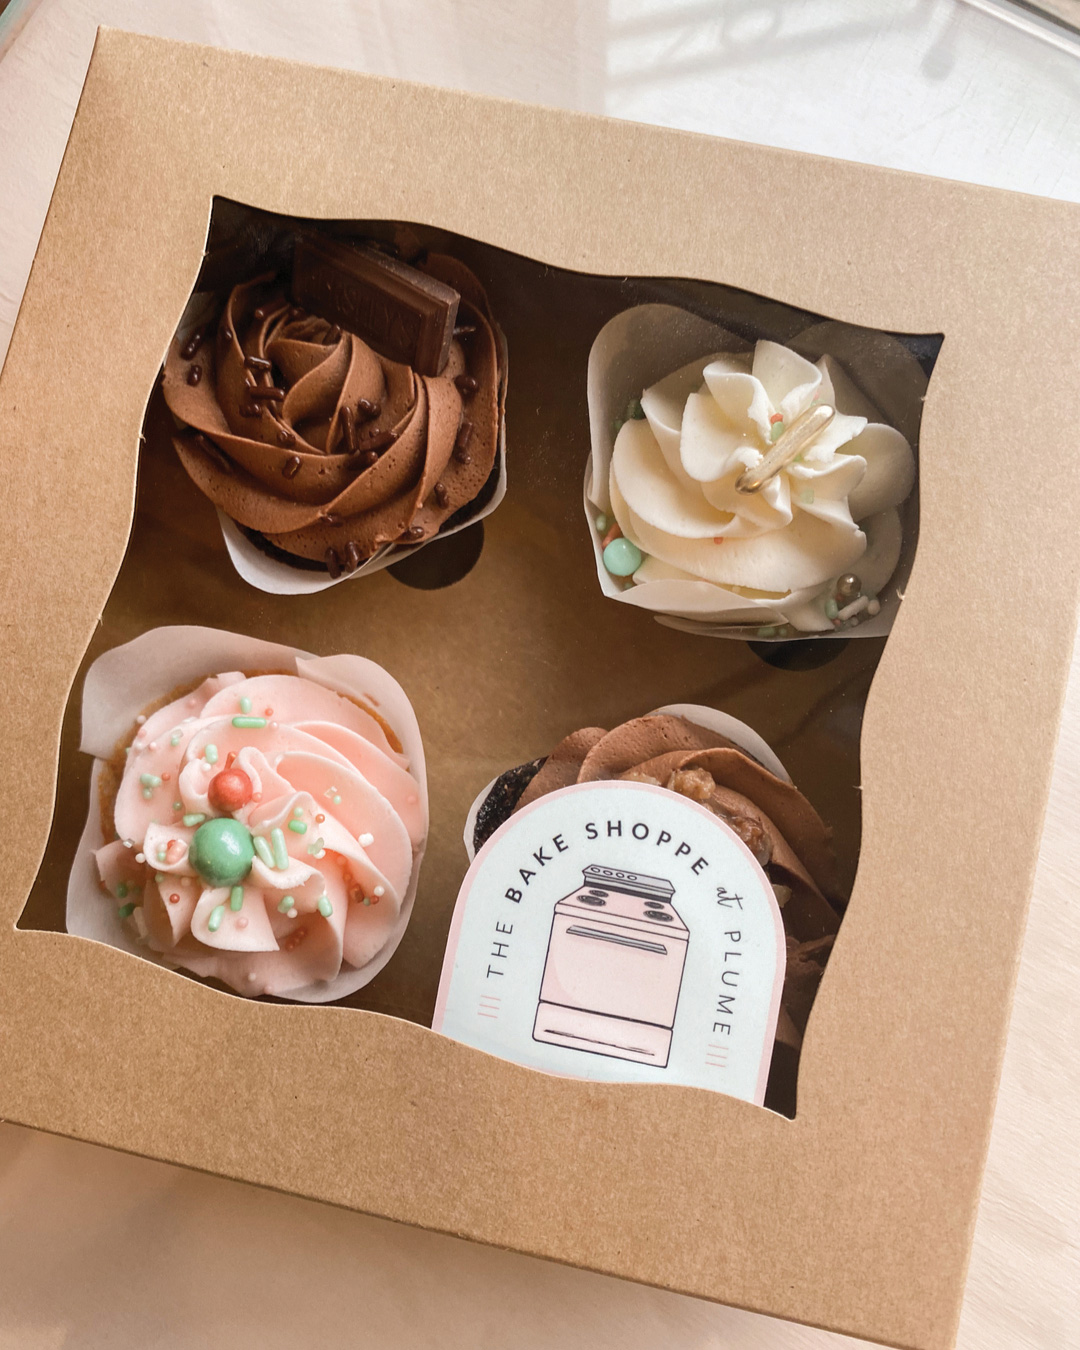 Cupcakes from the Bake Shoppe at Plume